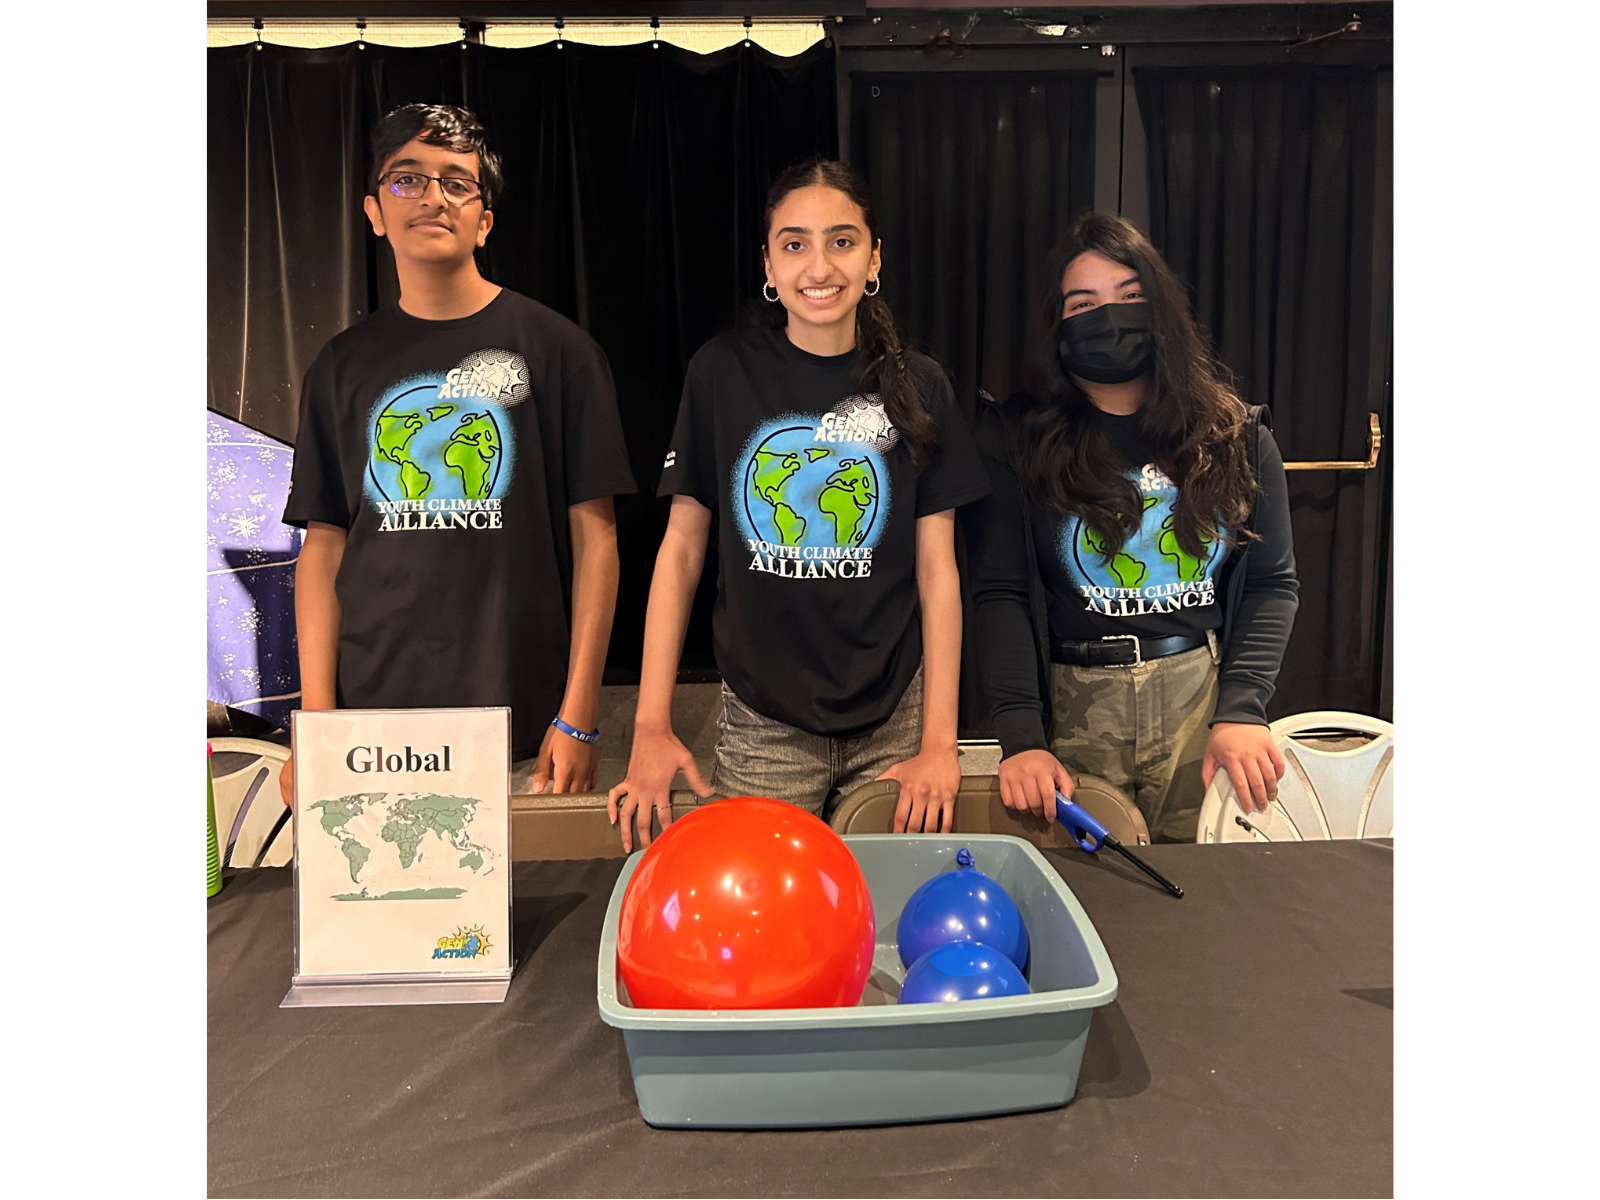 Three youth wearing Youth Climate Alliance t-shirts stand behind a pop-up exhibit table with a container of water and two balloons floating in front of them.